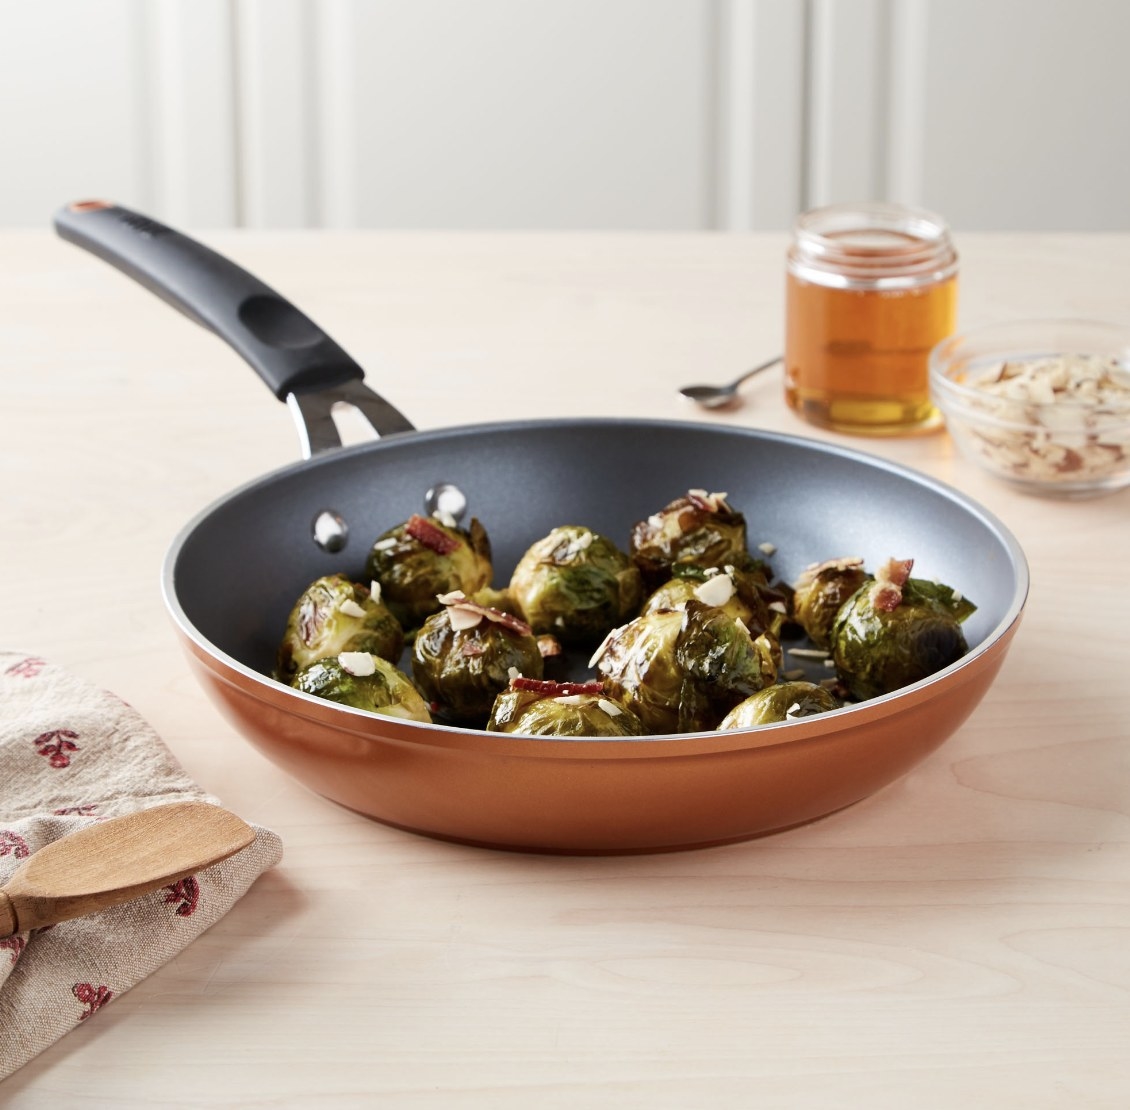 The copper pan is holding roasted Brussels sprouts and is surrounded by other cooking supplies